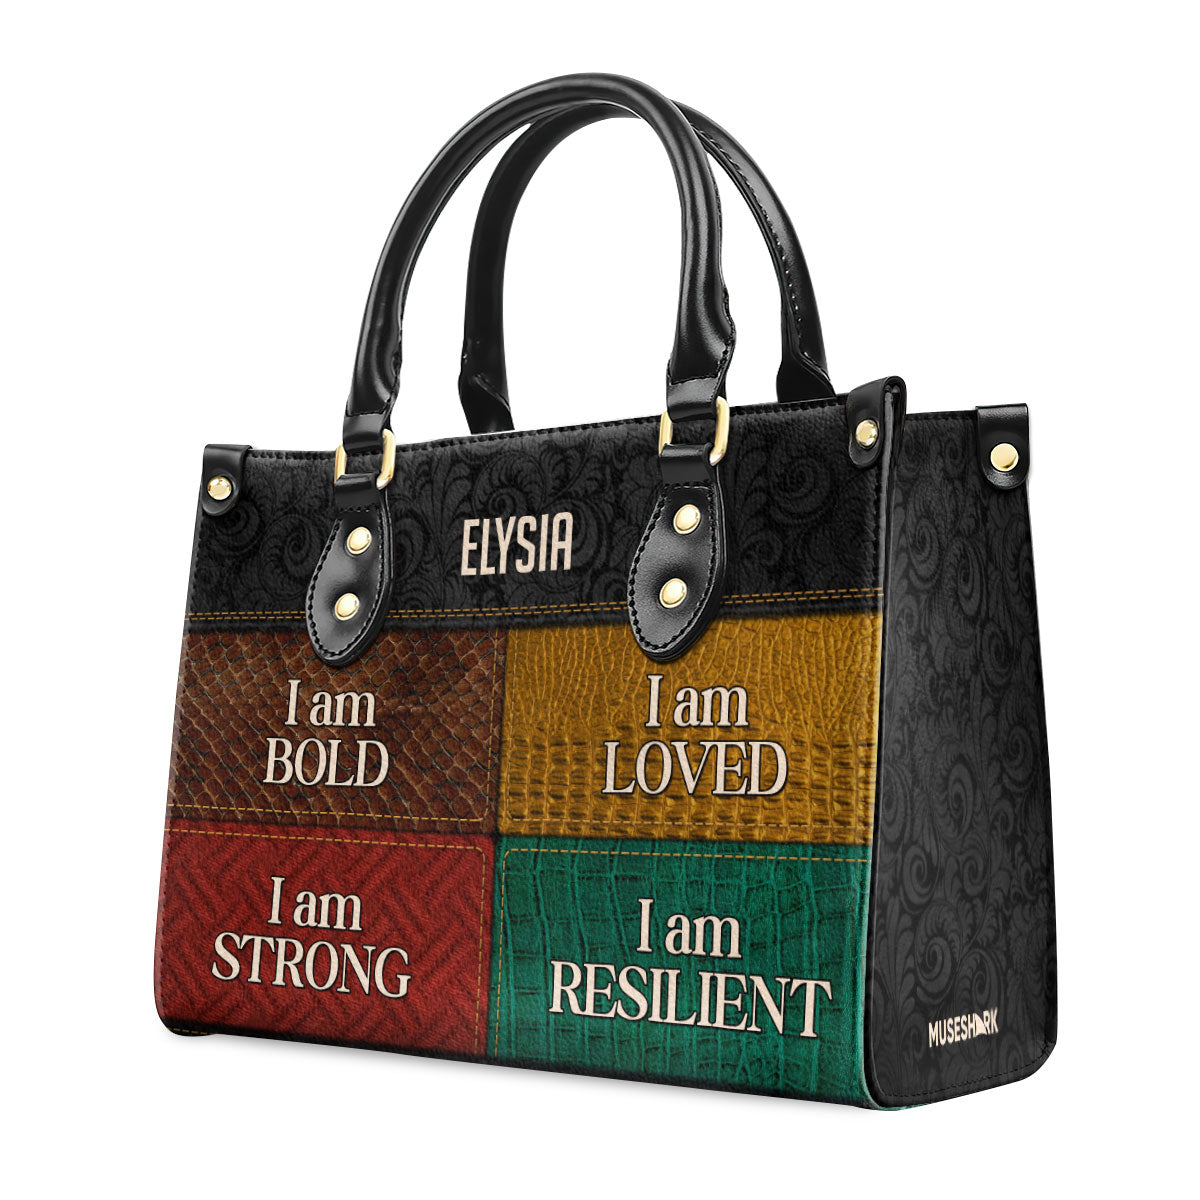 I Am Loved - Personalized Leather Handbag MS01